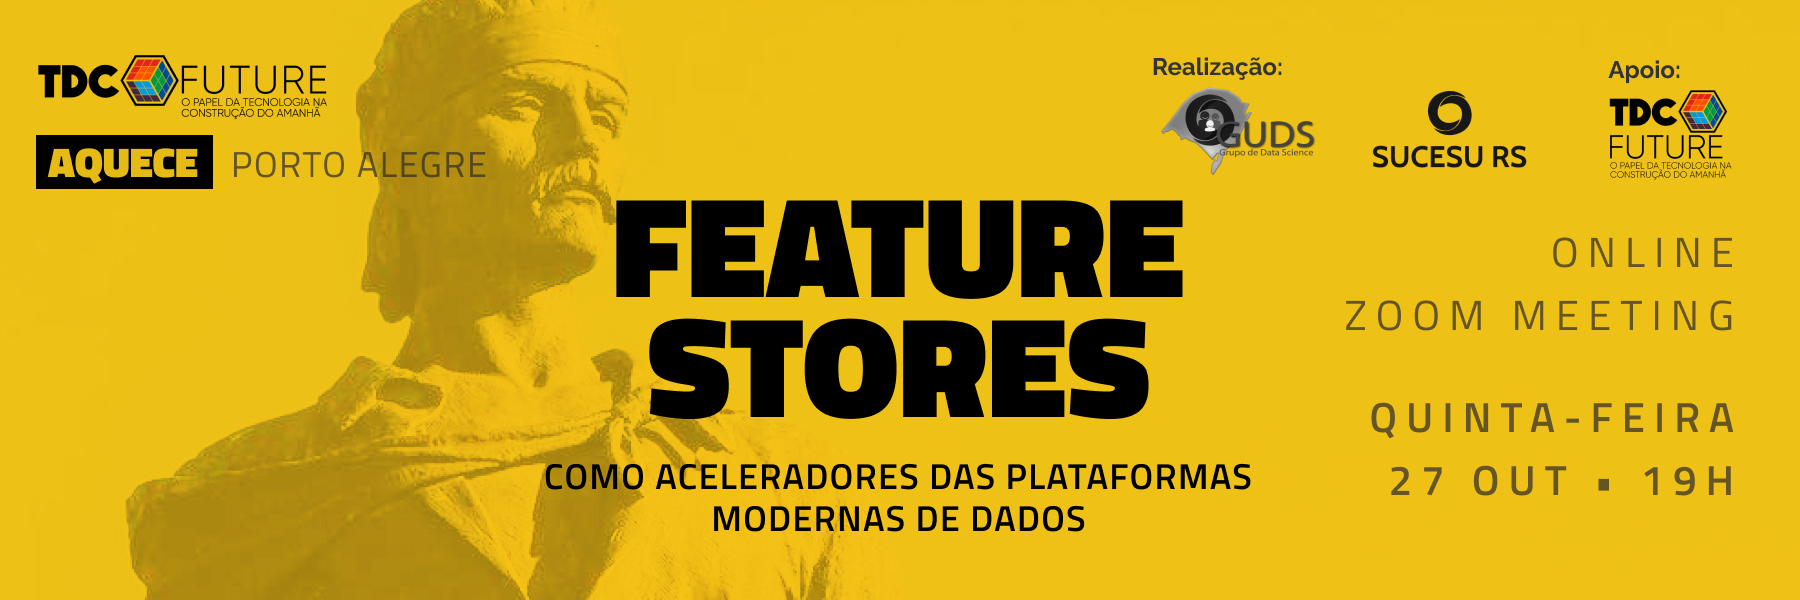 GUDS - Feature Stores